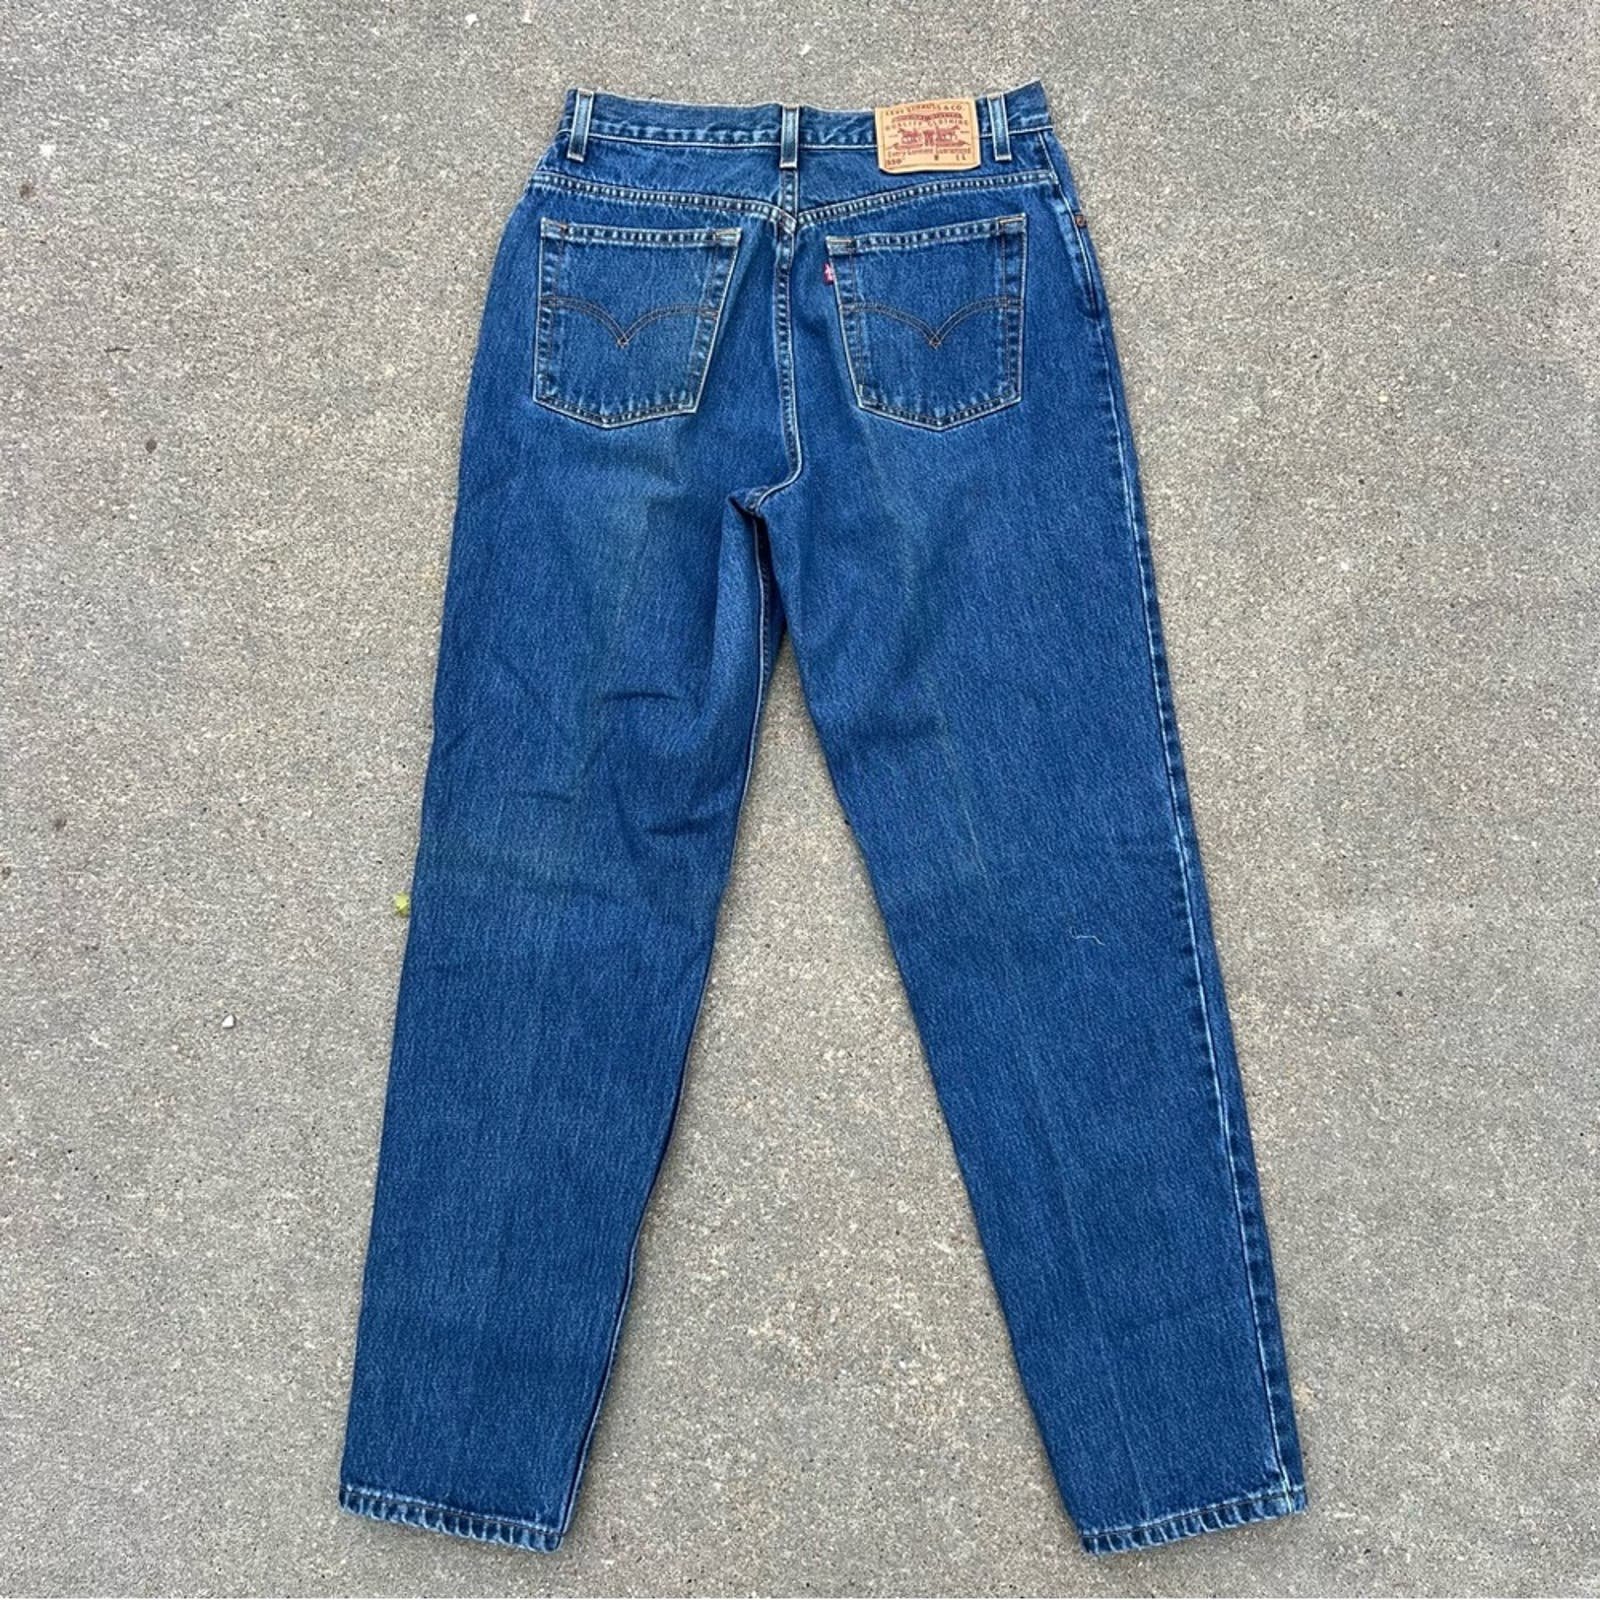 Popular Vintage 90s Levi’s 550 relaxed fit tapered leg mom jeans Ladies 14 REG LONG nL0ChYCK2 Discount